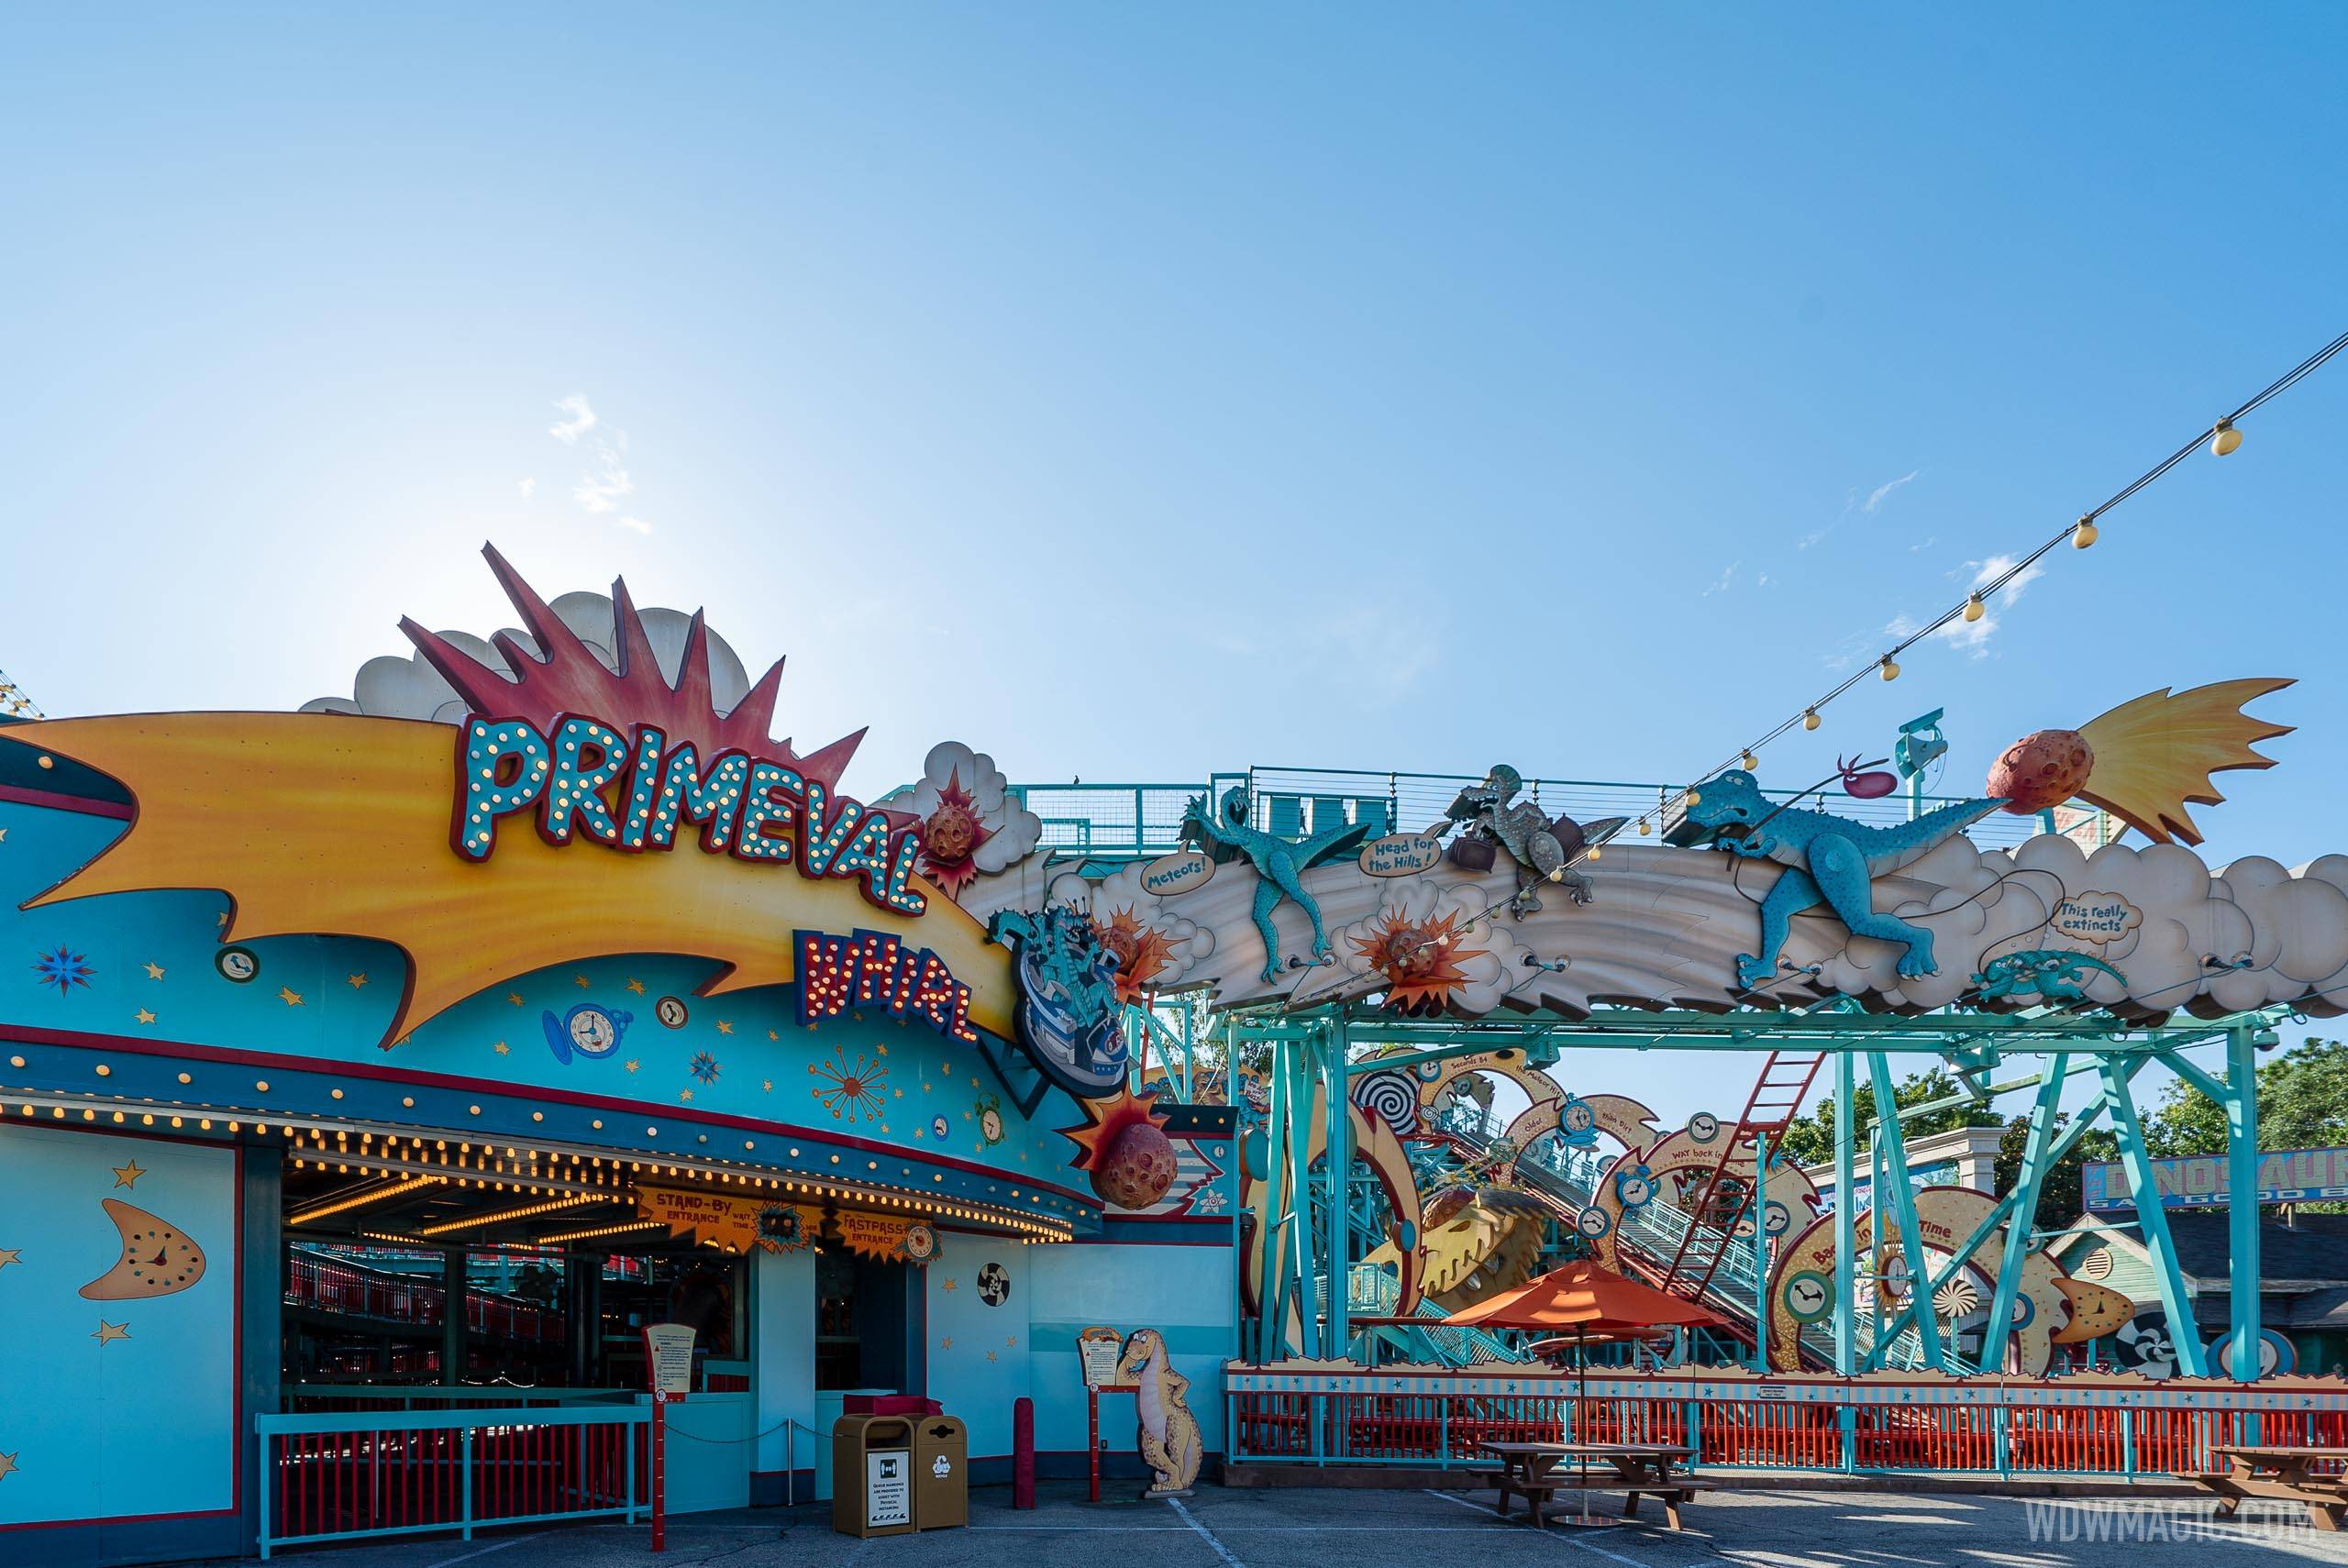 Primeval Whirl overview